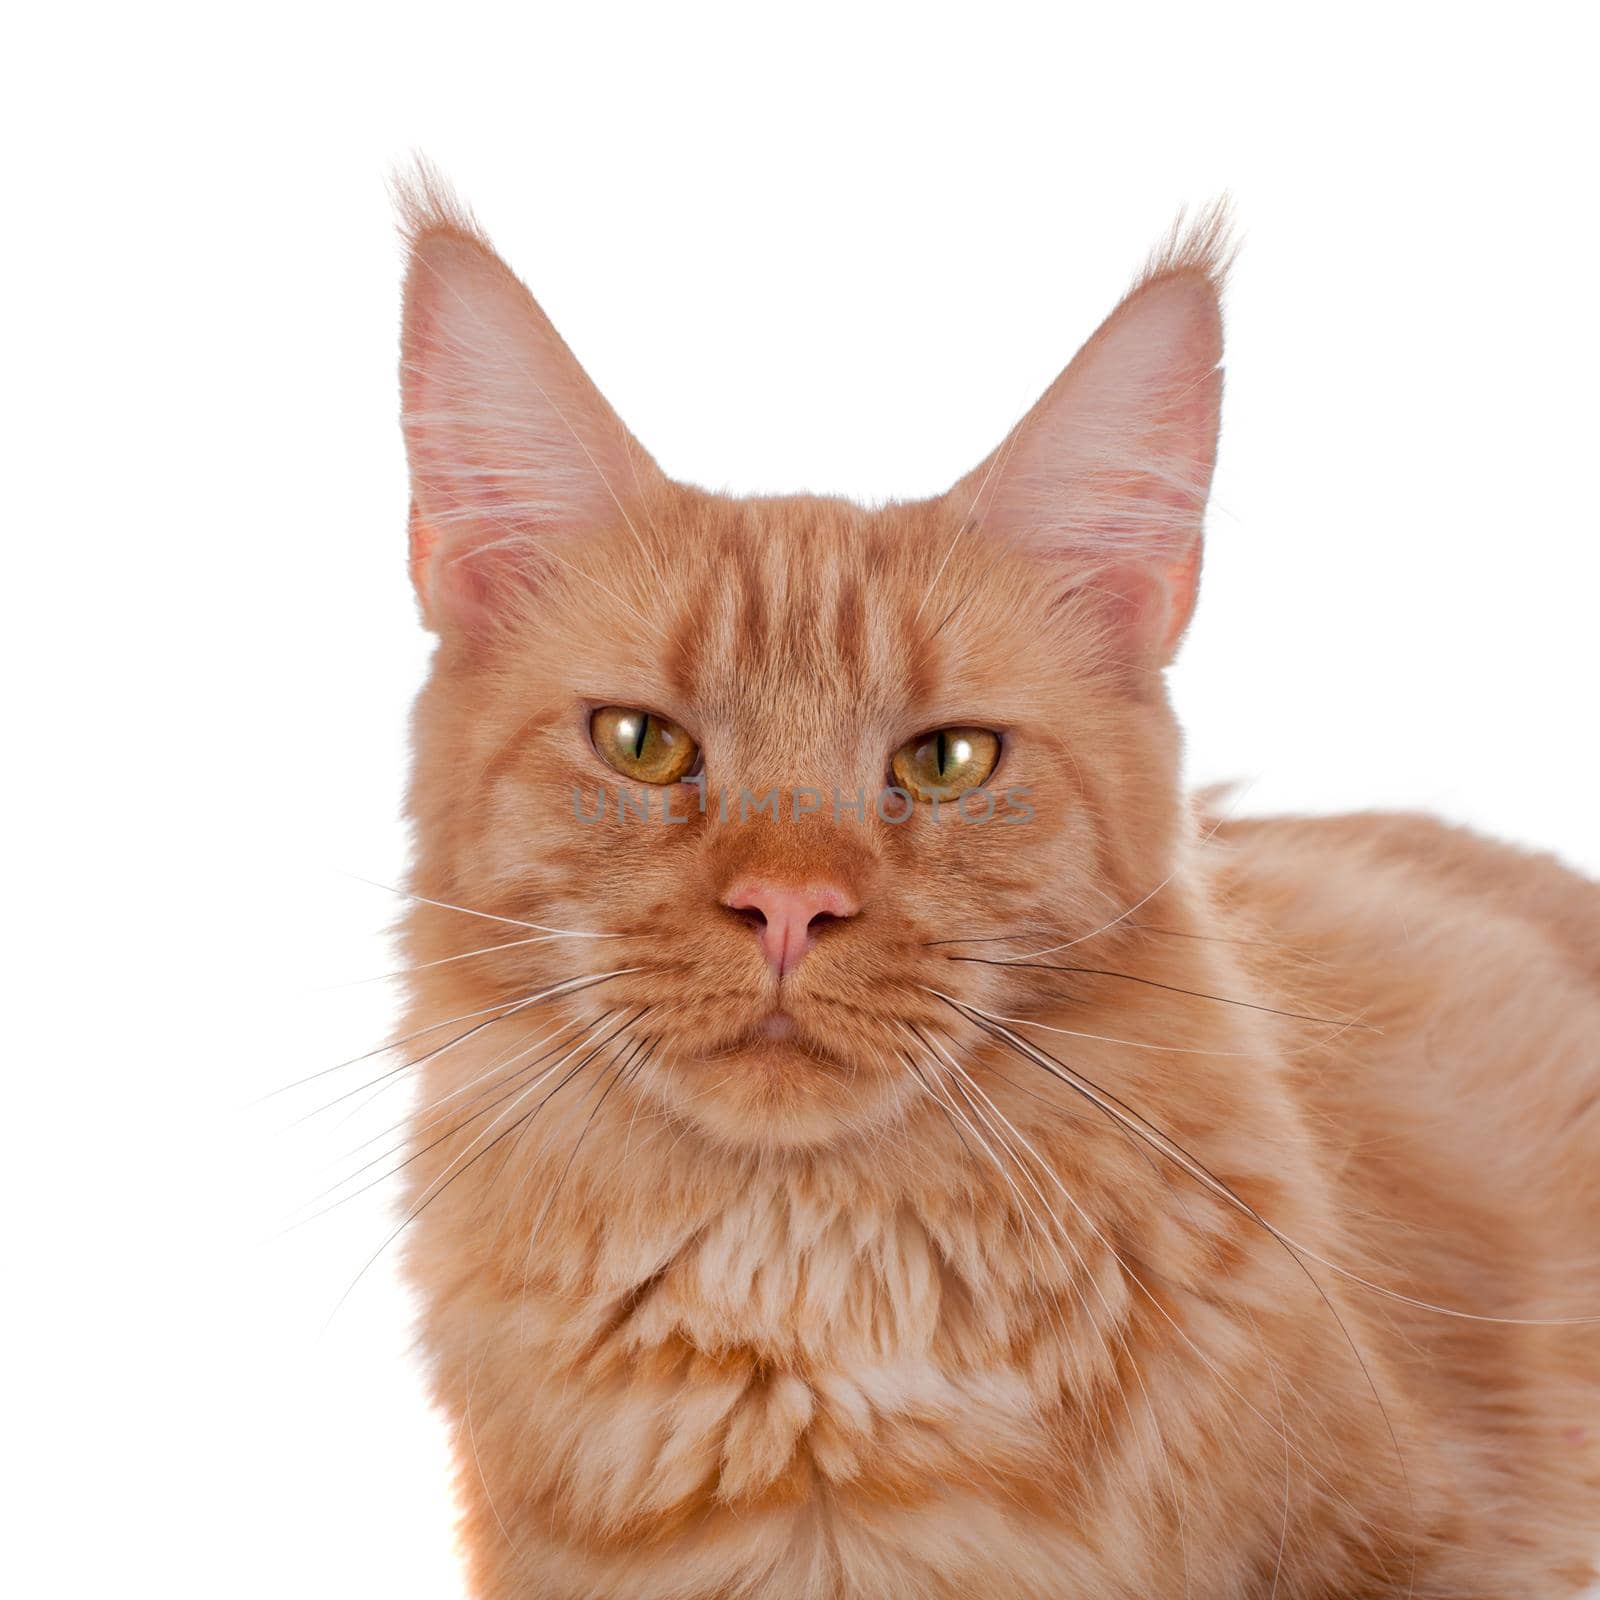 Red Maine Coon cat isolated on white background